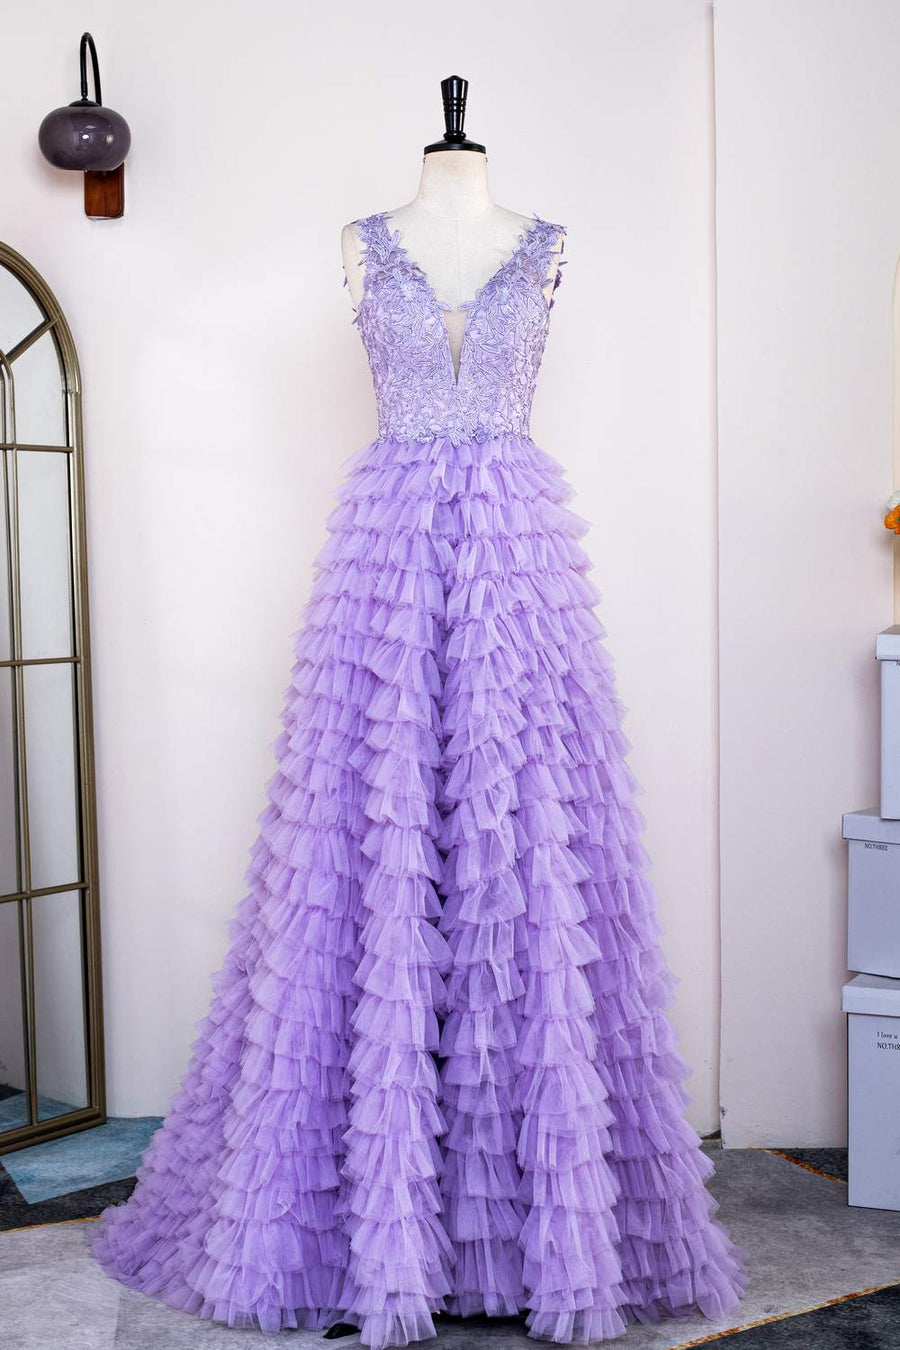 Lavender Plunging V Neck Layers Appliques Long Prom Dress with Slit